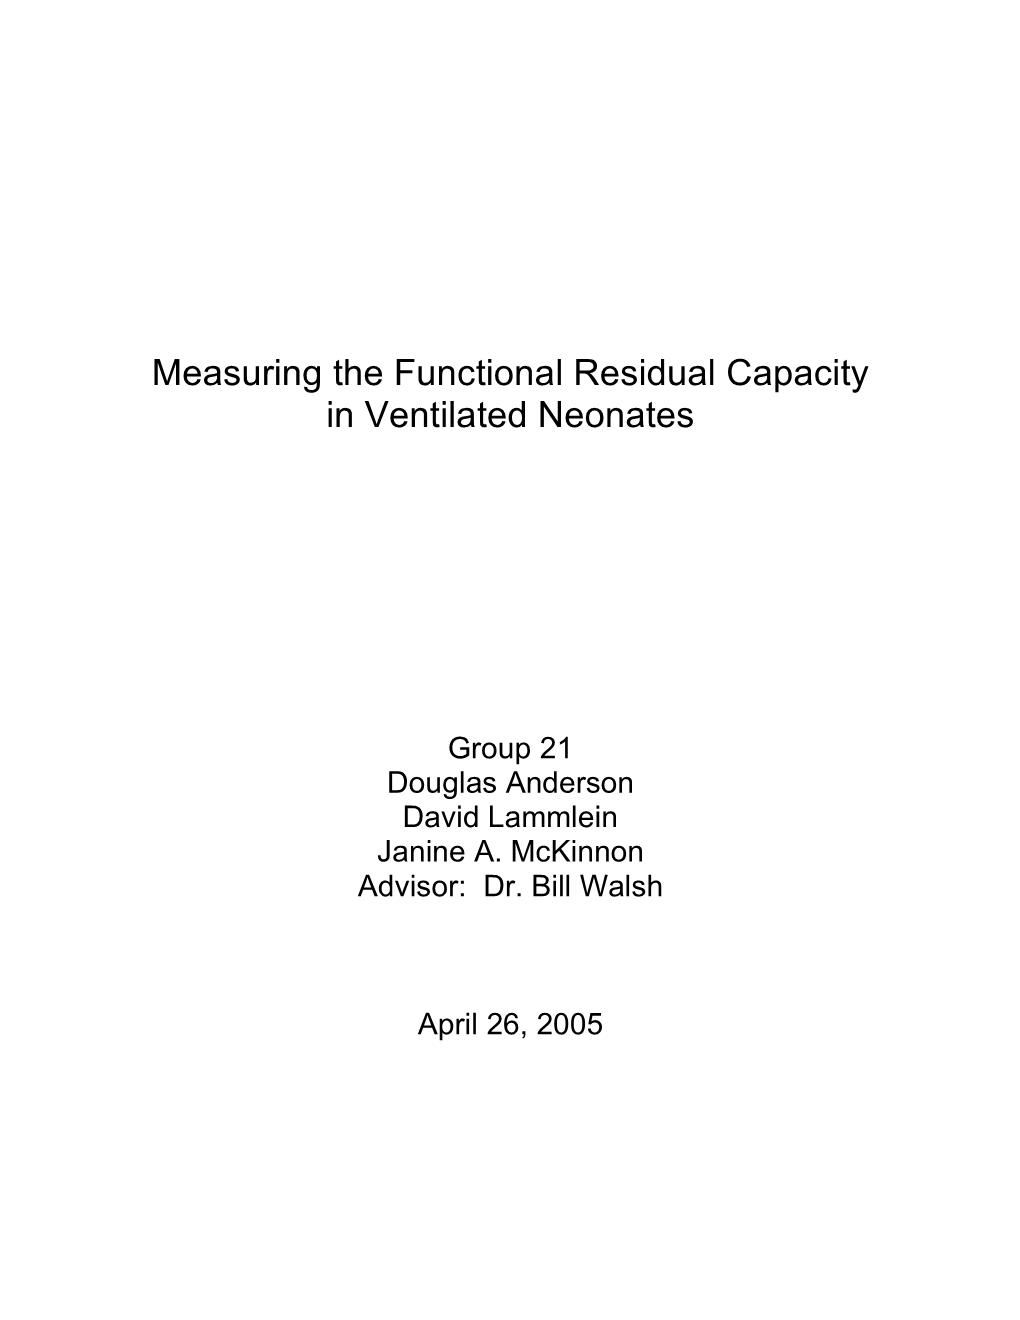 Measuring the Functional Residual Capacity in Ventilated Neonates